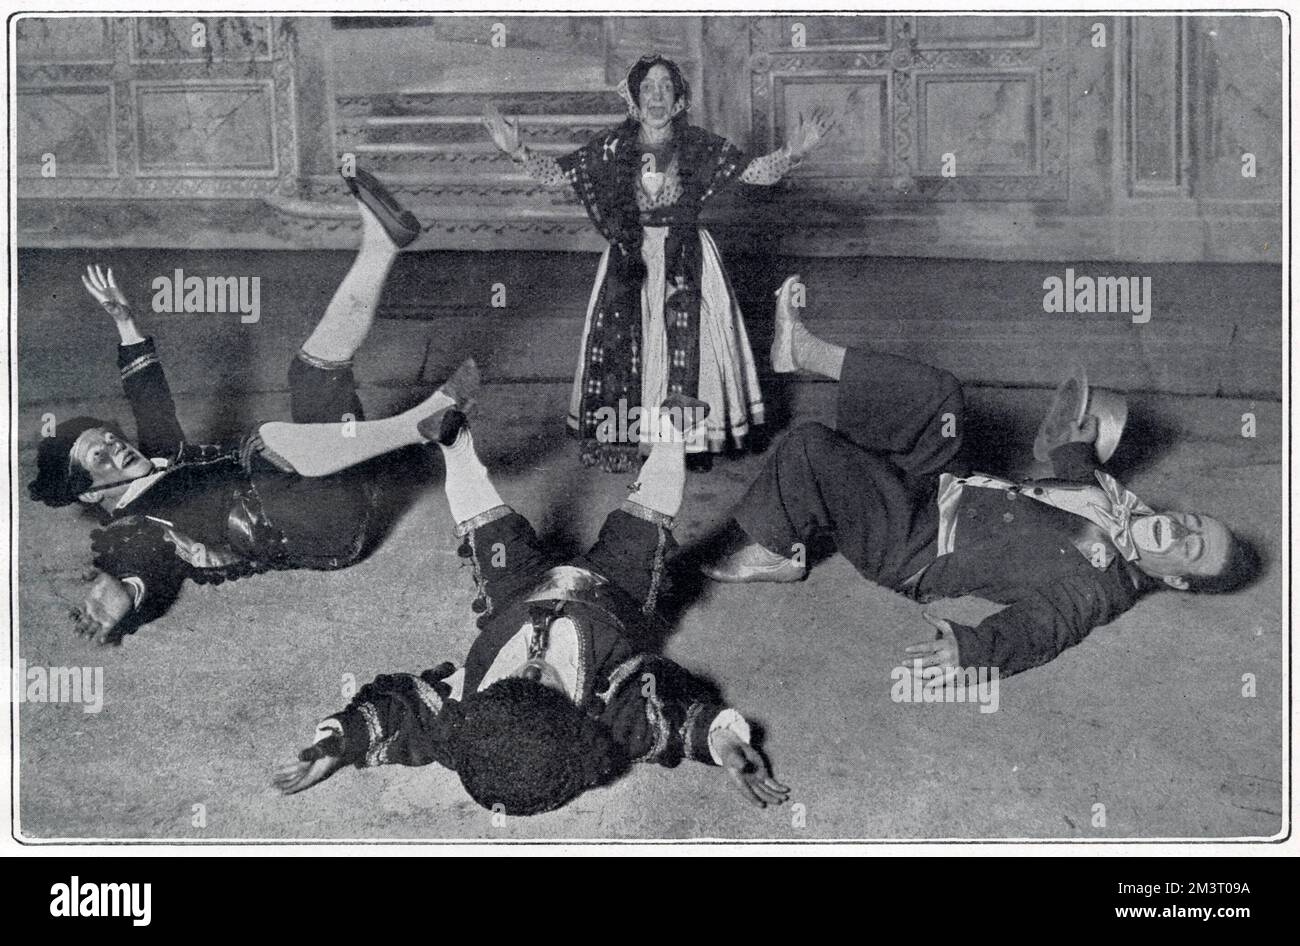 Scene from the London Hippodrome's Christmas production, The Golden Princess and the Elephant Hunters, with cast members falling over due to a sneeze given by Ma-in-law (Miss Martha). On the left are Leonard and Francois as the king's physicians and on the right, the jester, played by Marceline the Droll, the Hippodrome's clown.                                                                             Humorous scene from the Christmas show at the London Hippodrome, The Golden Princess and the Elephant Hunters. The terrible effect of a sneeze has the royal physicians, Leonard and Francois, an Stock Photo